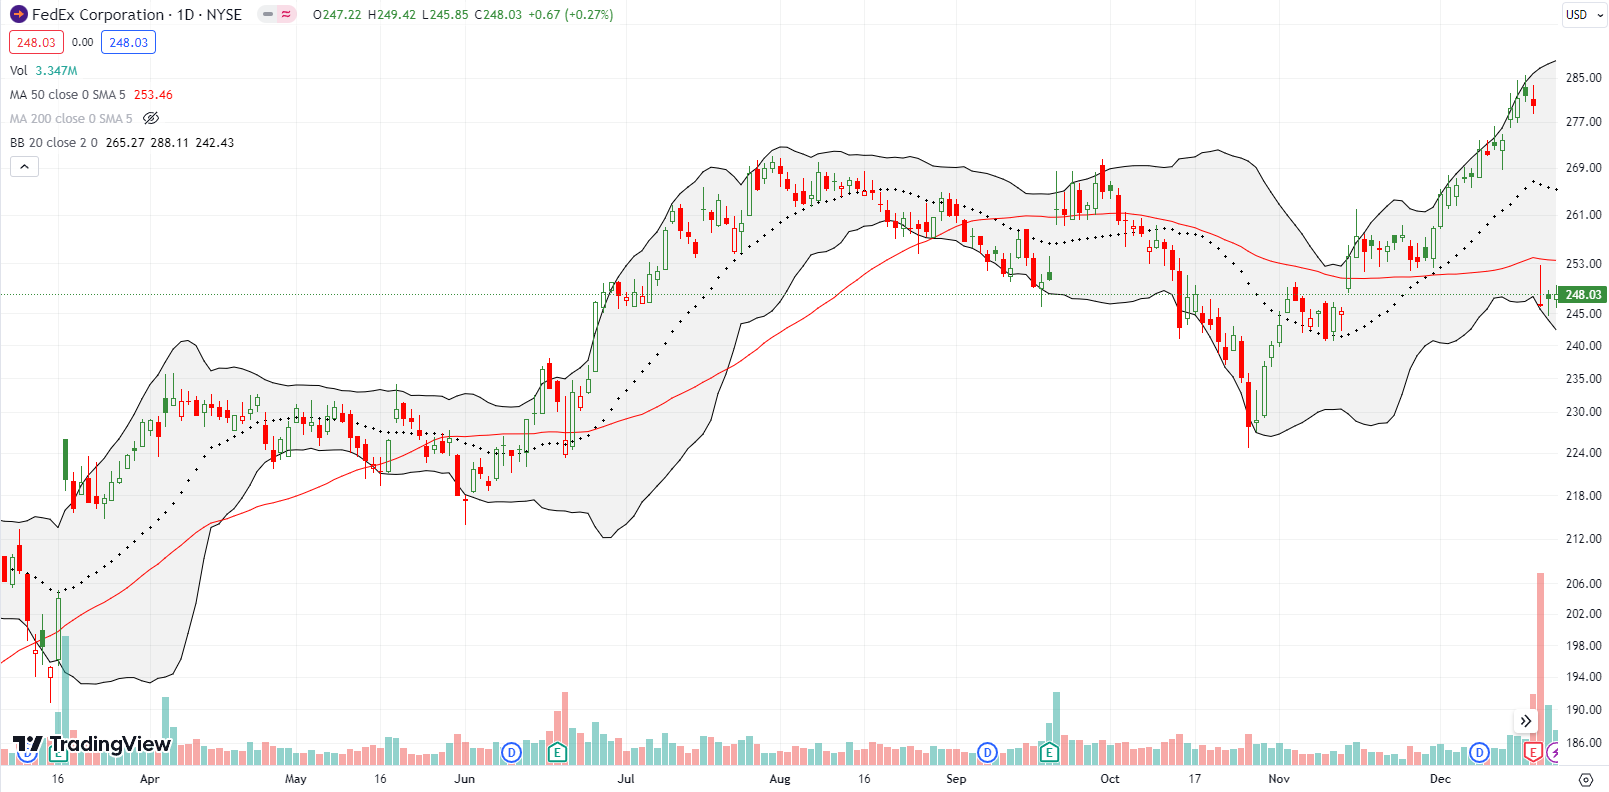 FedEx Corp (FDX) suddenly shot down below the 50DMA after poor post earnings results.